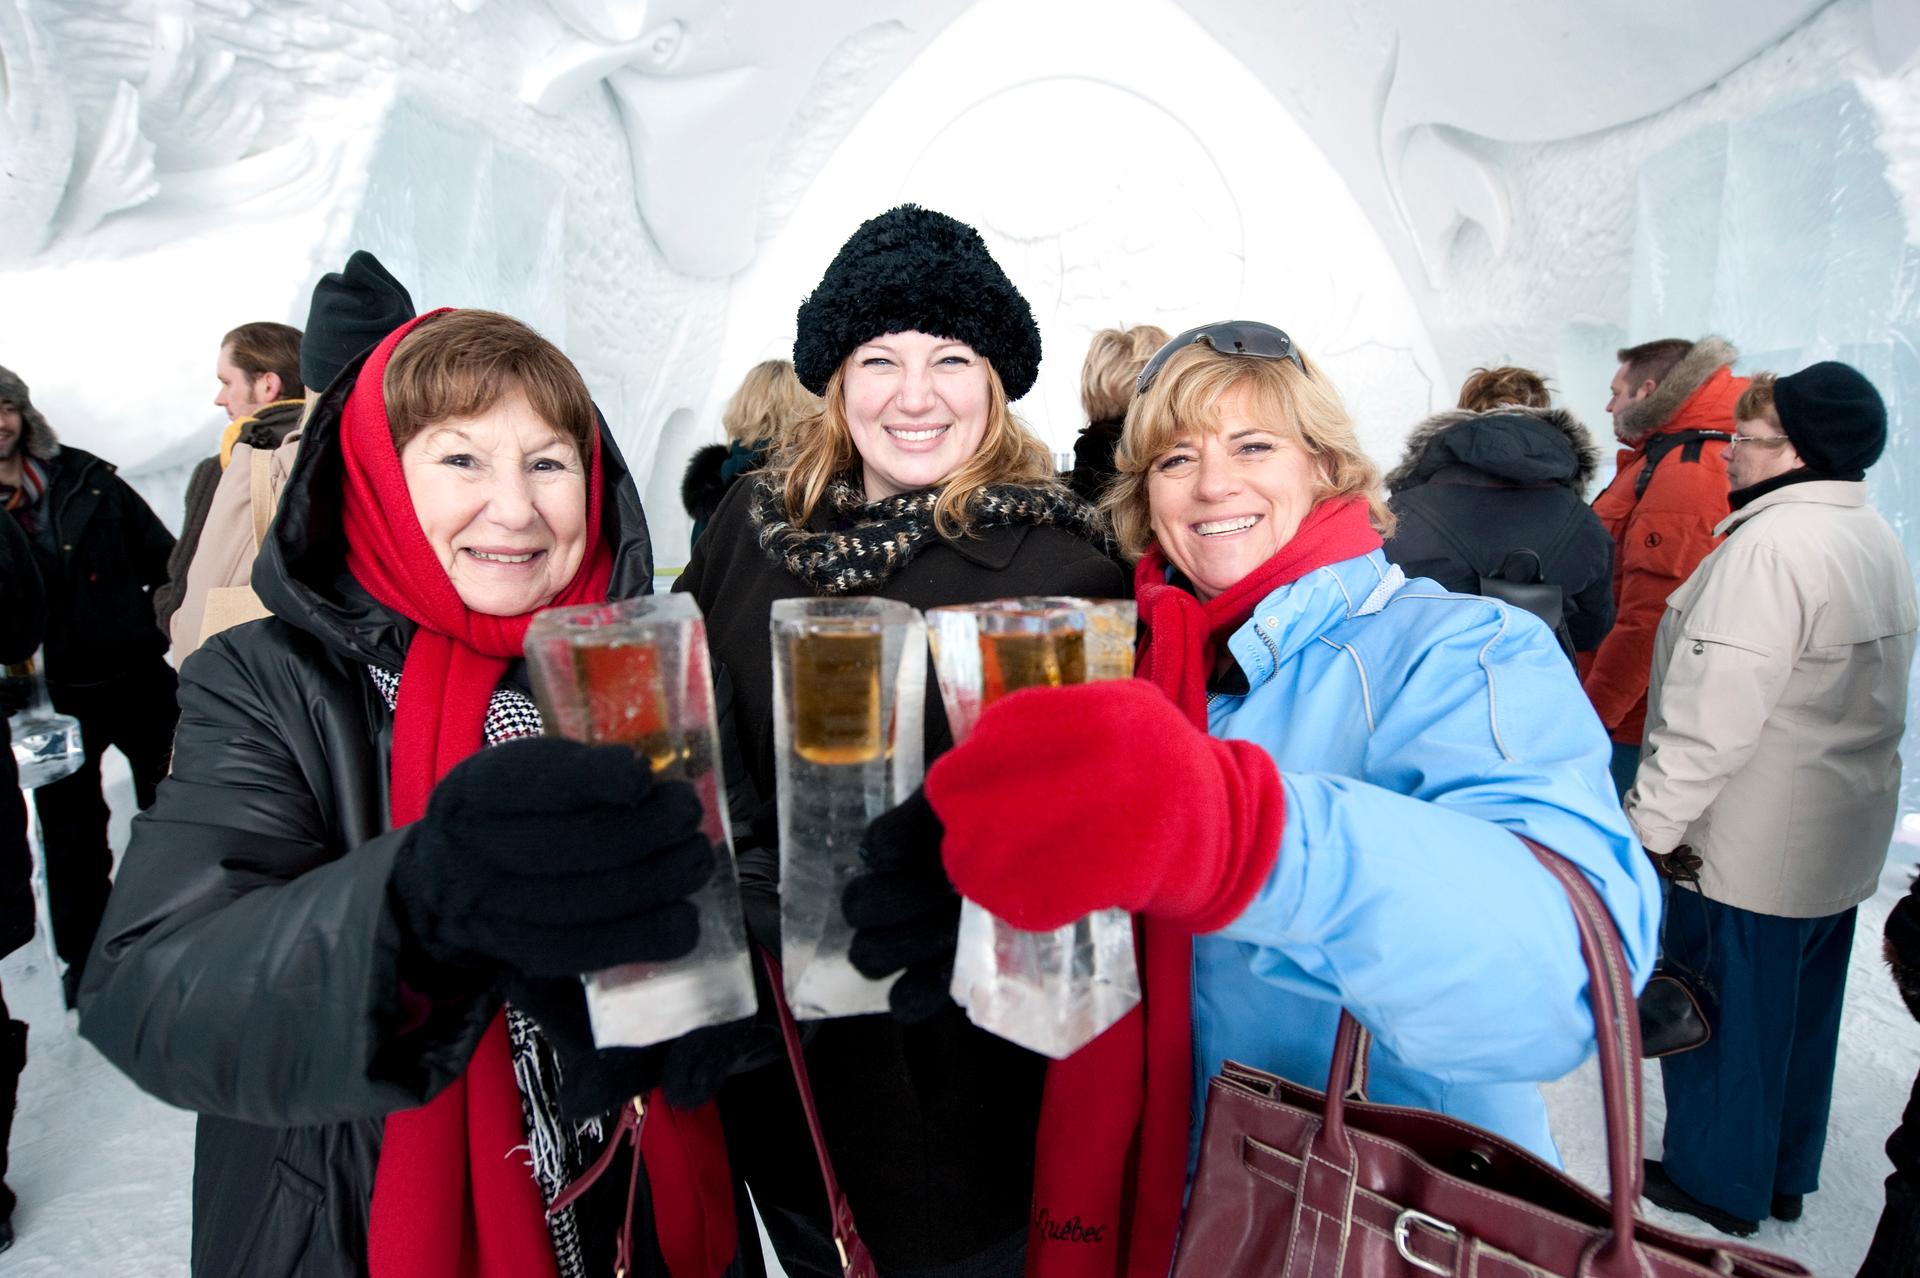 Toast to your team’s victories with a cool Caribou cocktail and celebration dinner at the frozen Hôtel de Glace